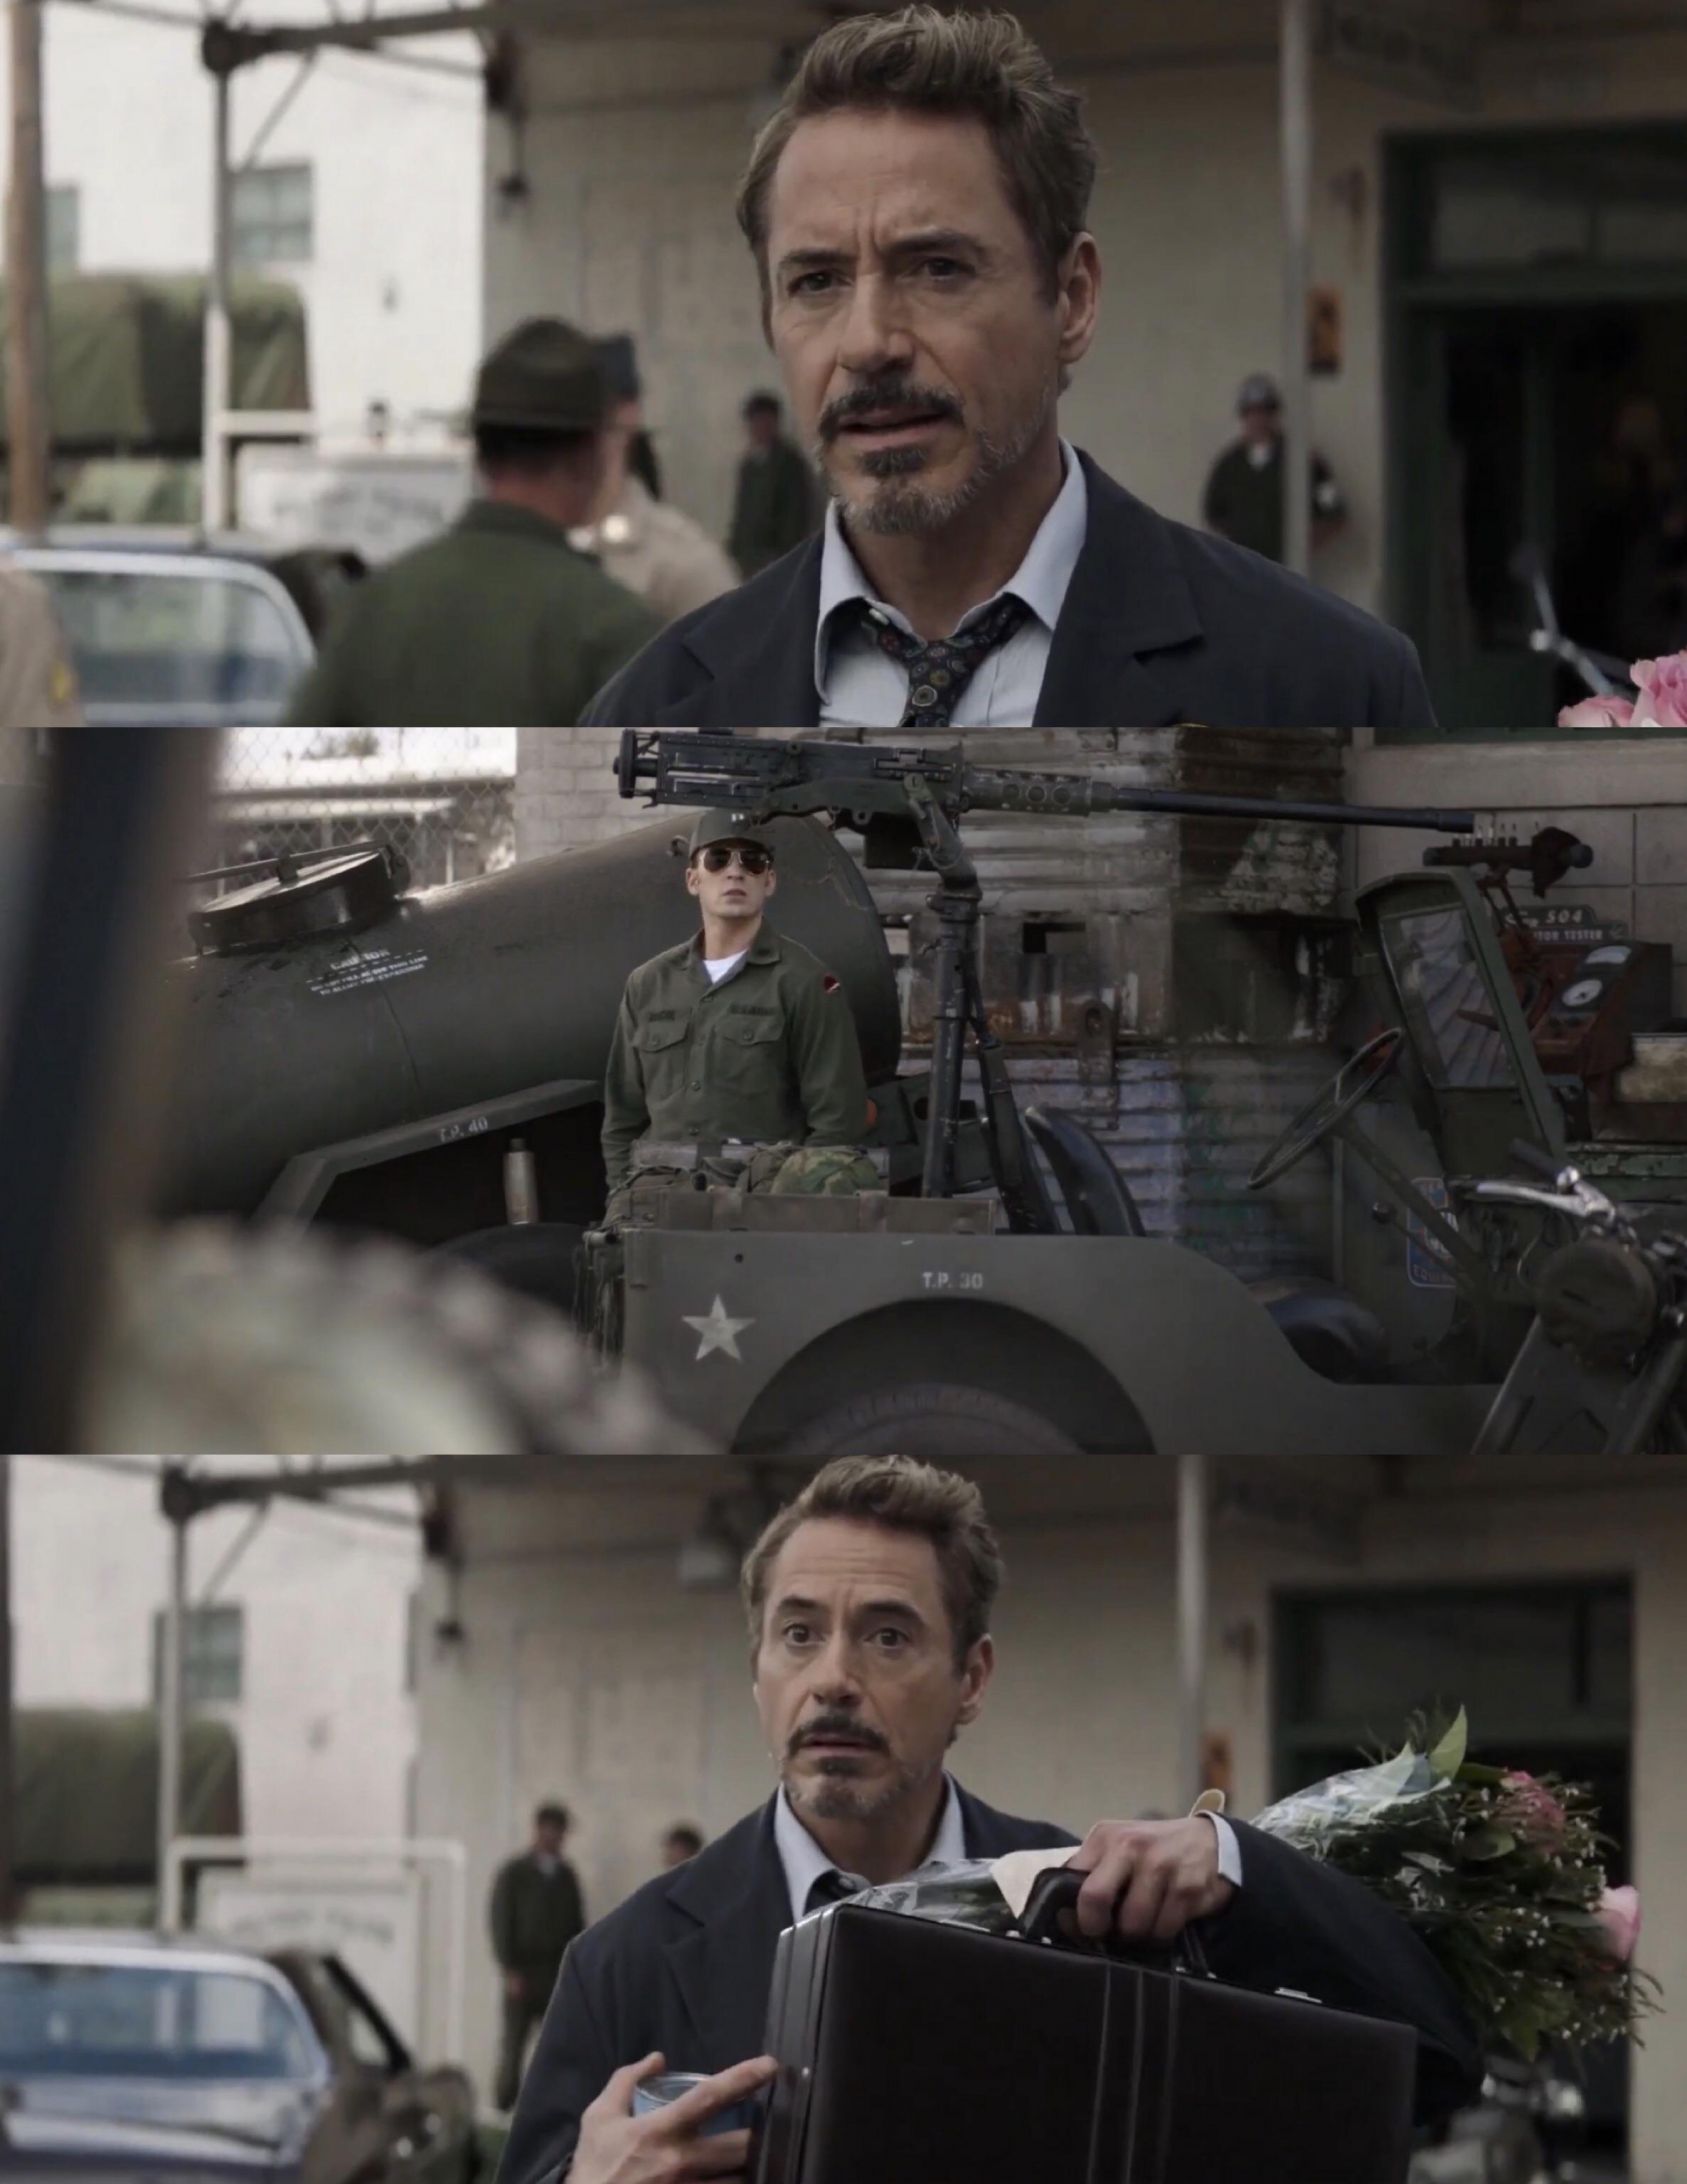 Tony Pointing at a briefcase Blank Meme Template